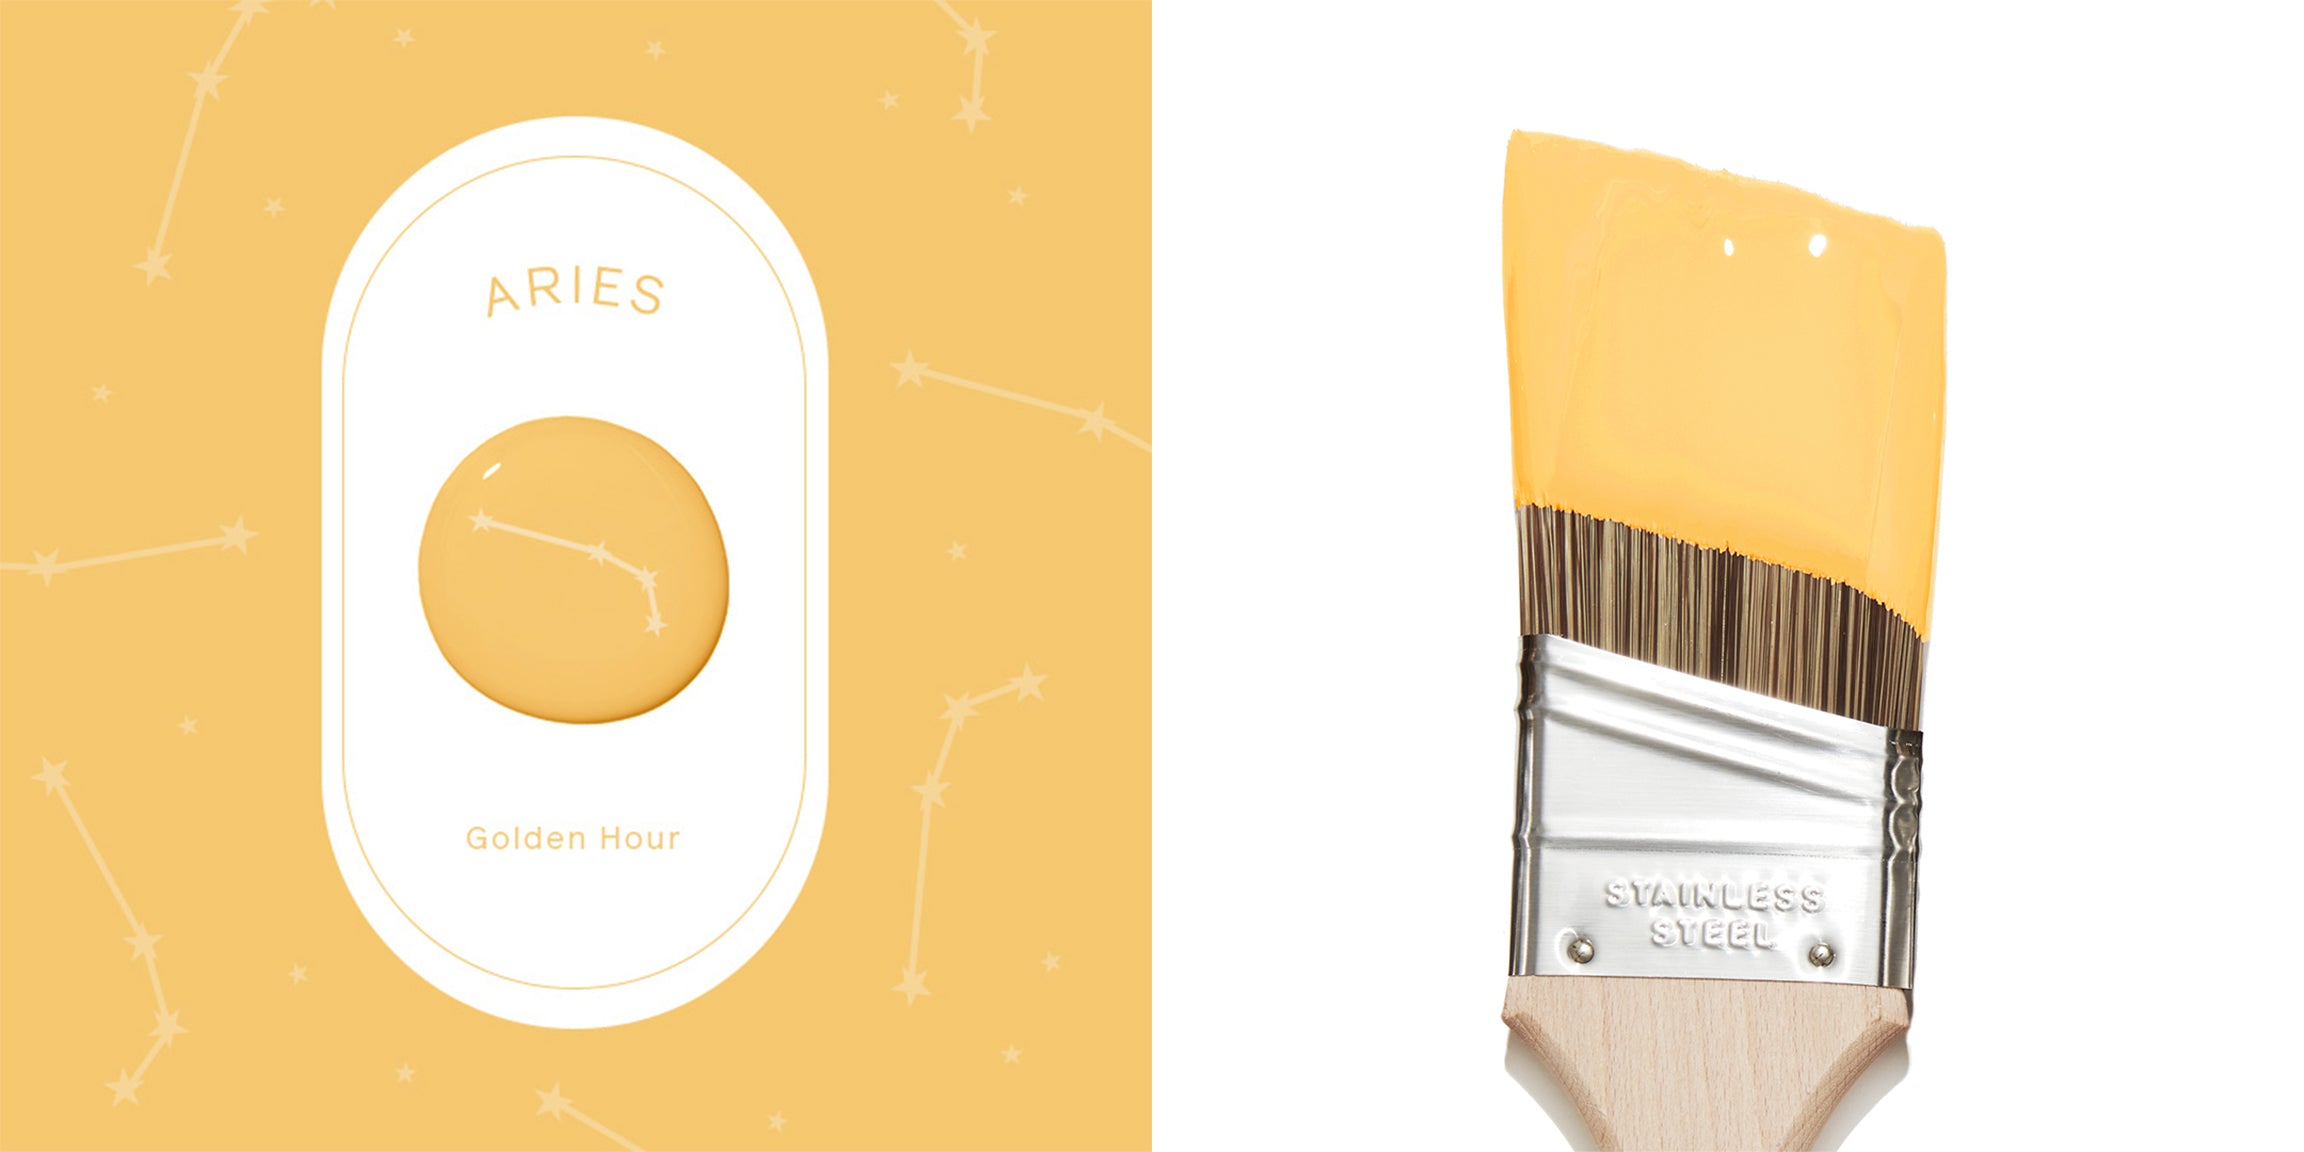 Get your 2023 horoscope and find the perfect paint colors for your zodiac. For Aries, it’s Golden Hour — a sunny yellow paint color from Clare.